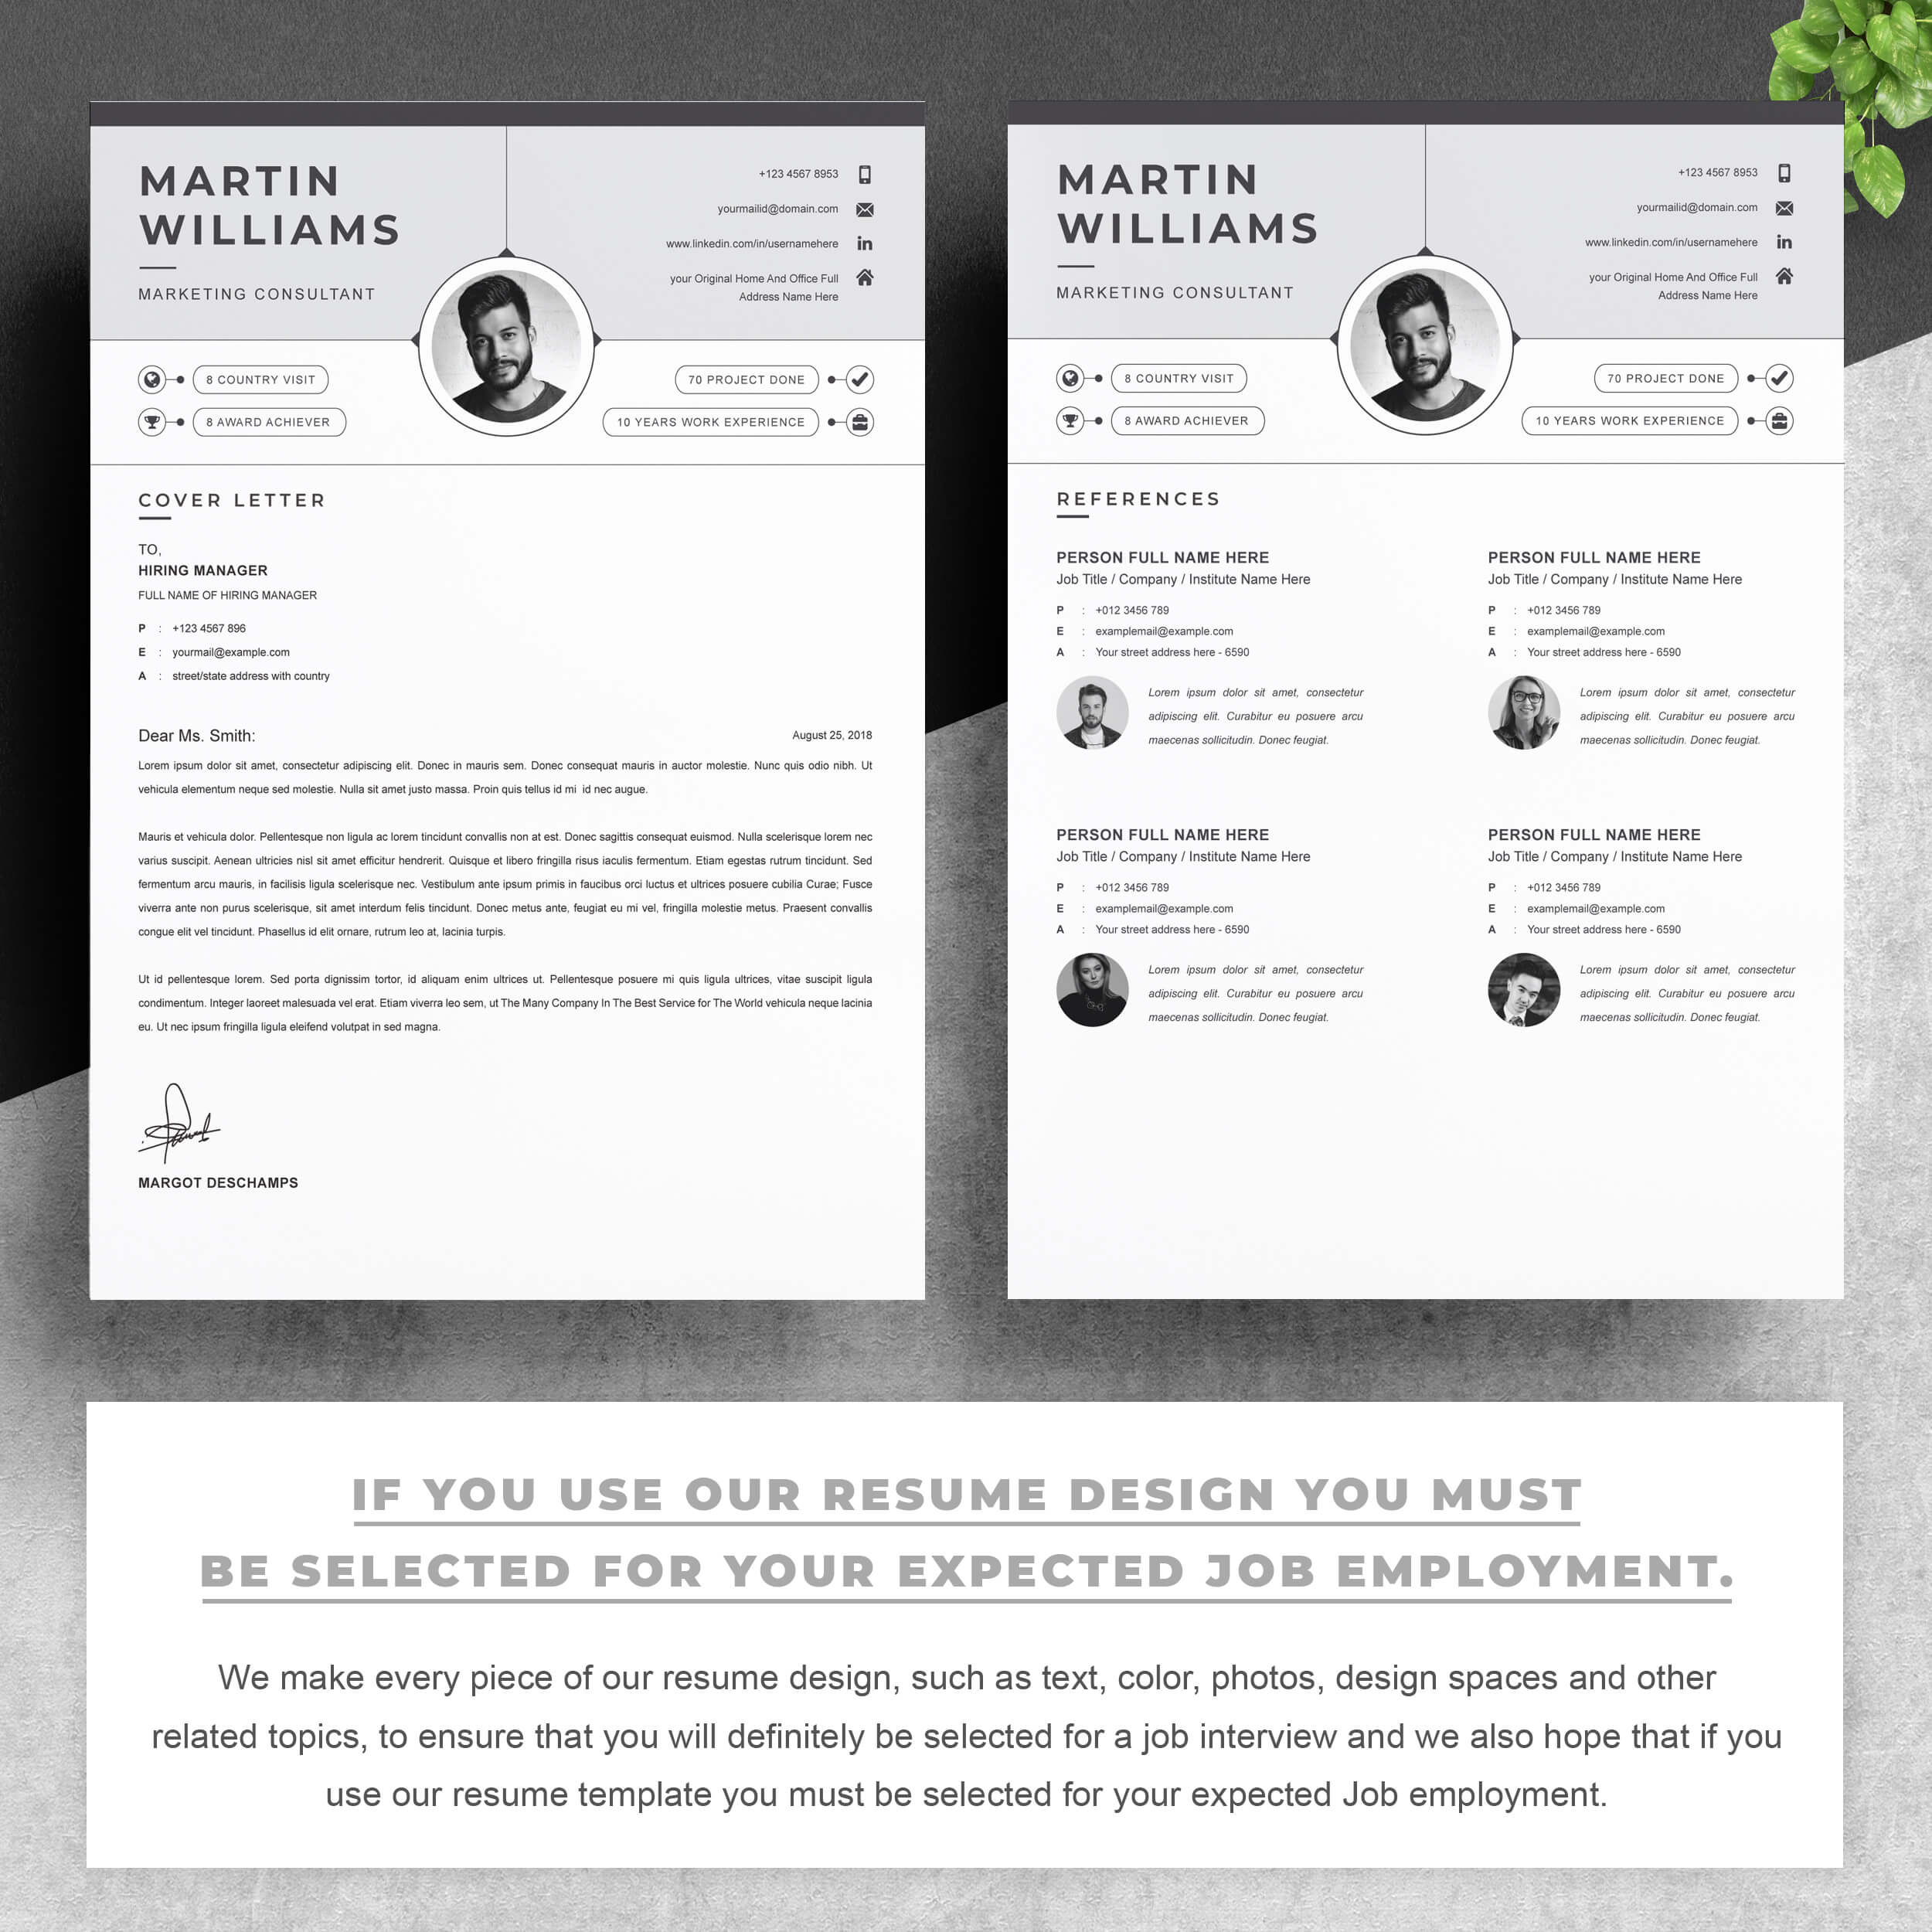 03 2 pages free resume design template copy 3 414